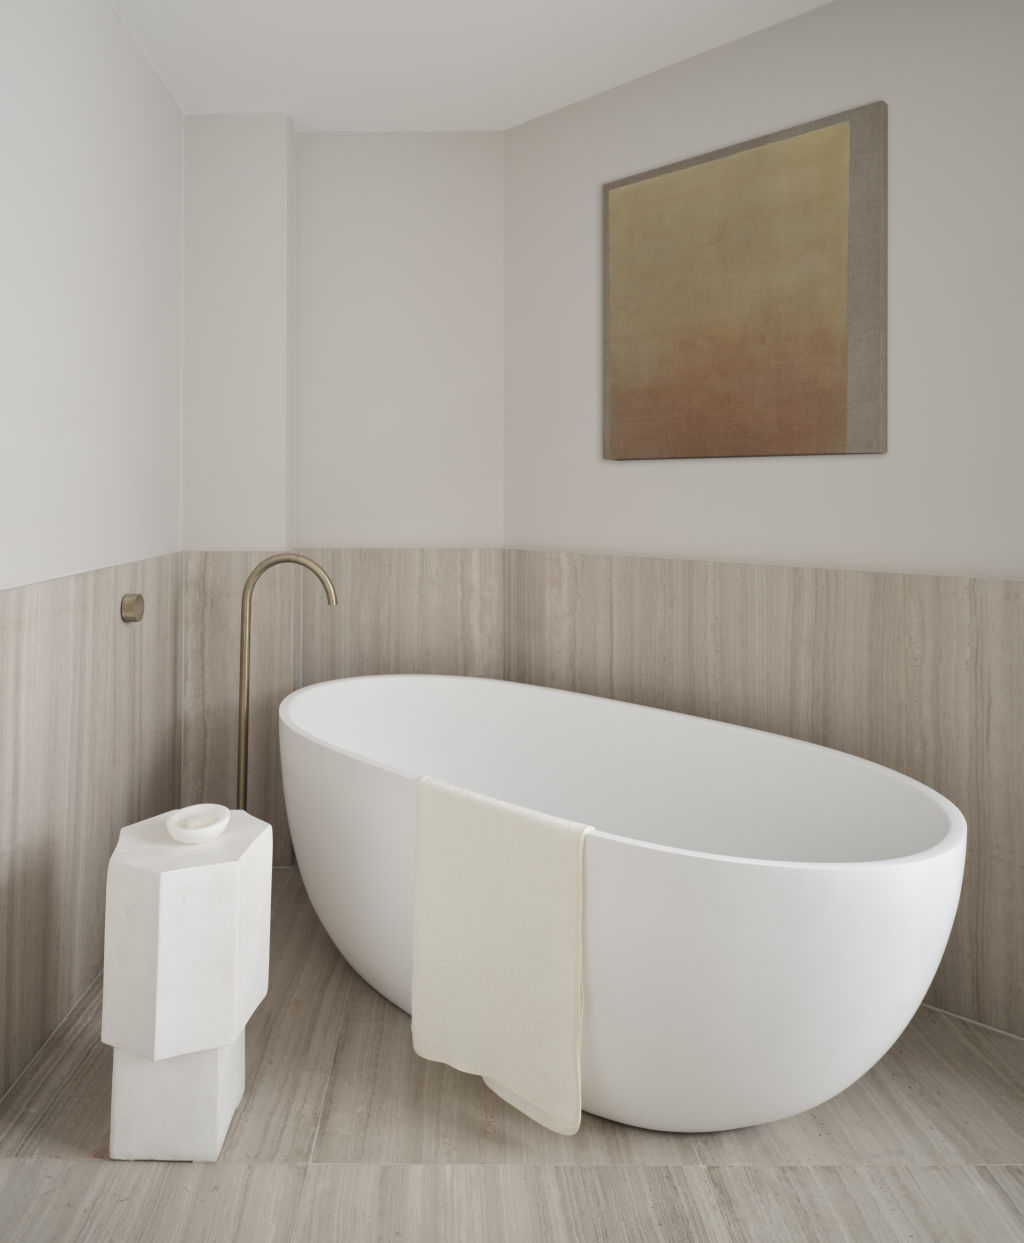 Even the bathtub presents itself as a work of art. Photo: Supplied